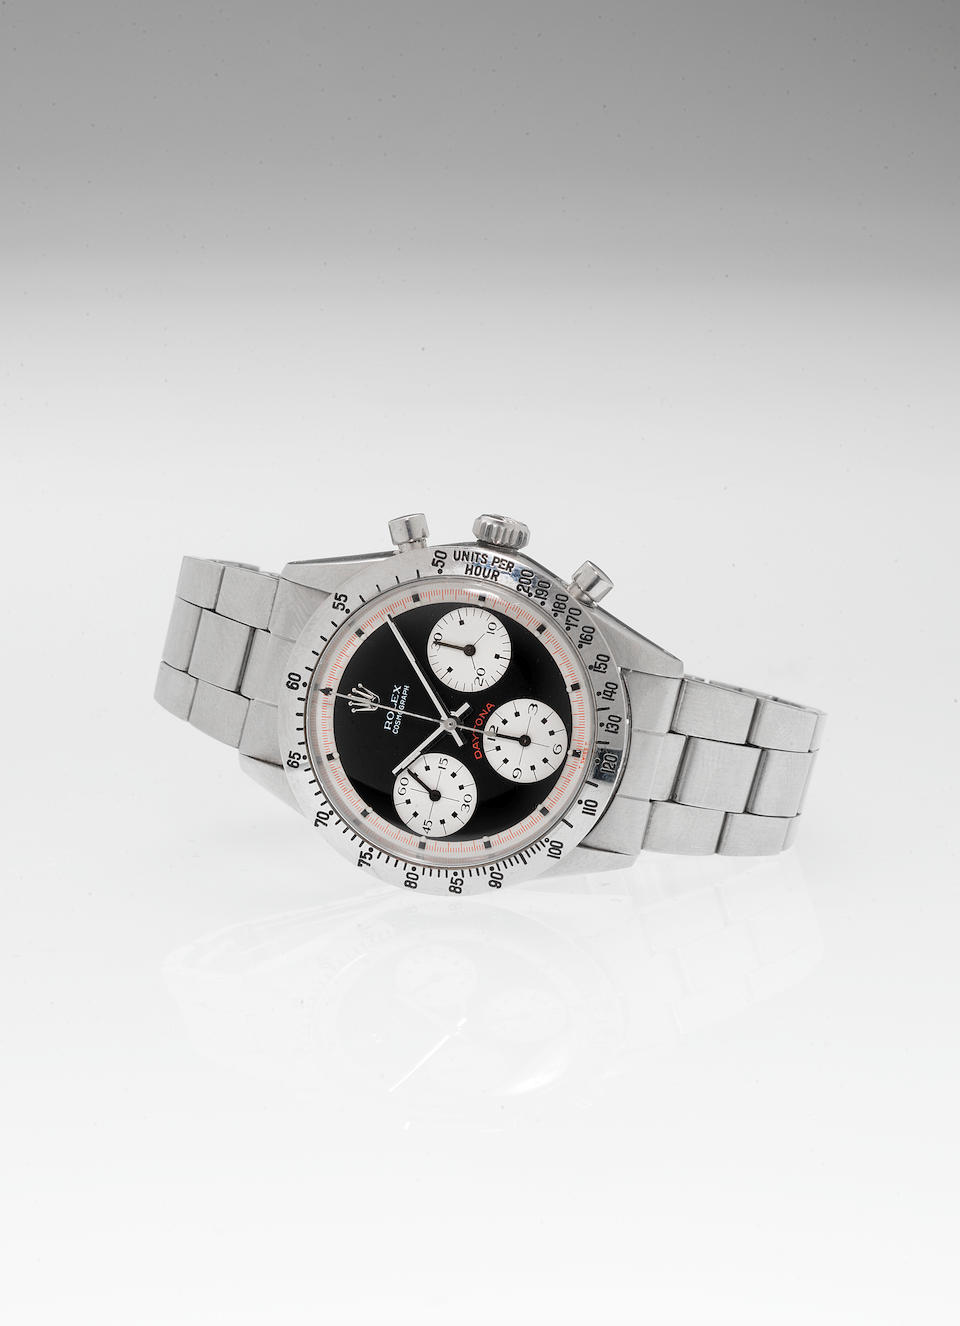 Rolex. A fine and rare stainless steel chronograph wristwatch together with original Rolex guarantee, swing tag, fitted box and instructionsCosmograph Daytona, "Paul Newman", Ref.6262, Case No. 2737305, 1969, Sold 7th December 1971